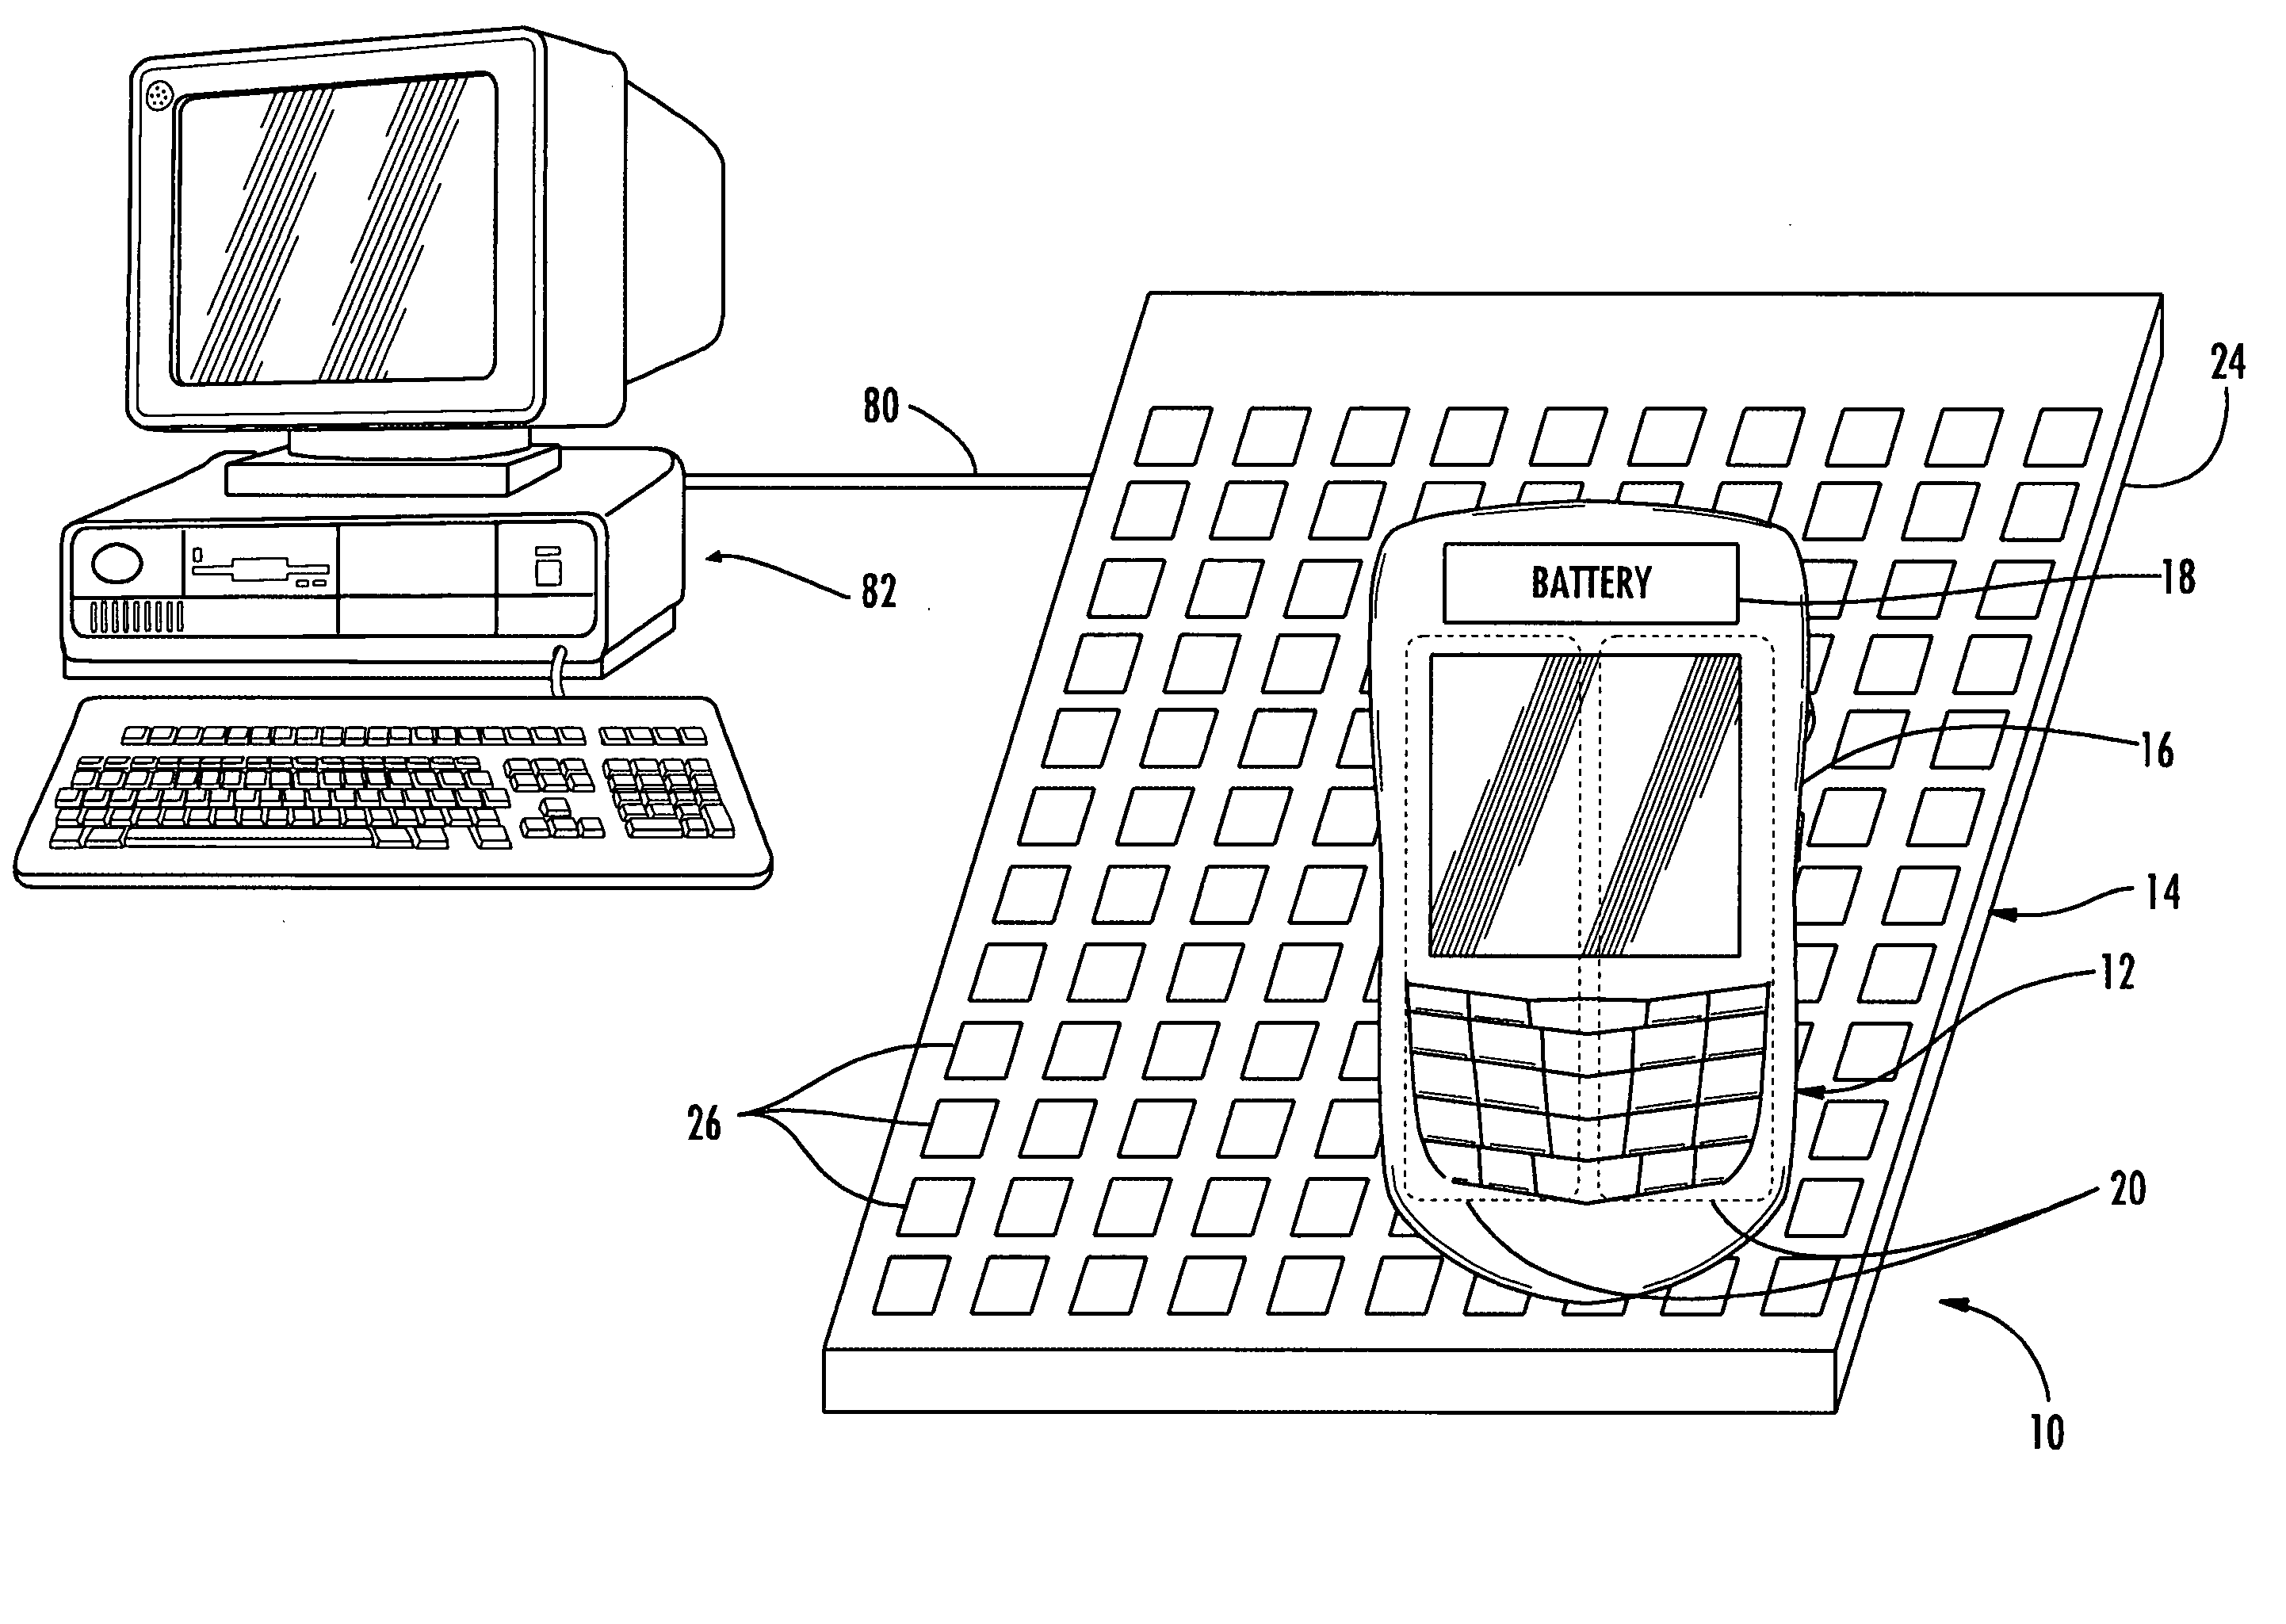 Portable electronic device and capacitive charger providing data transfer and associated methods